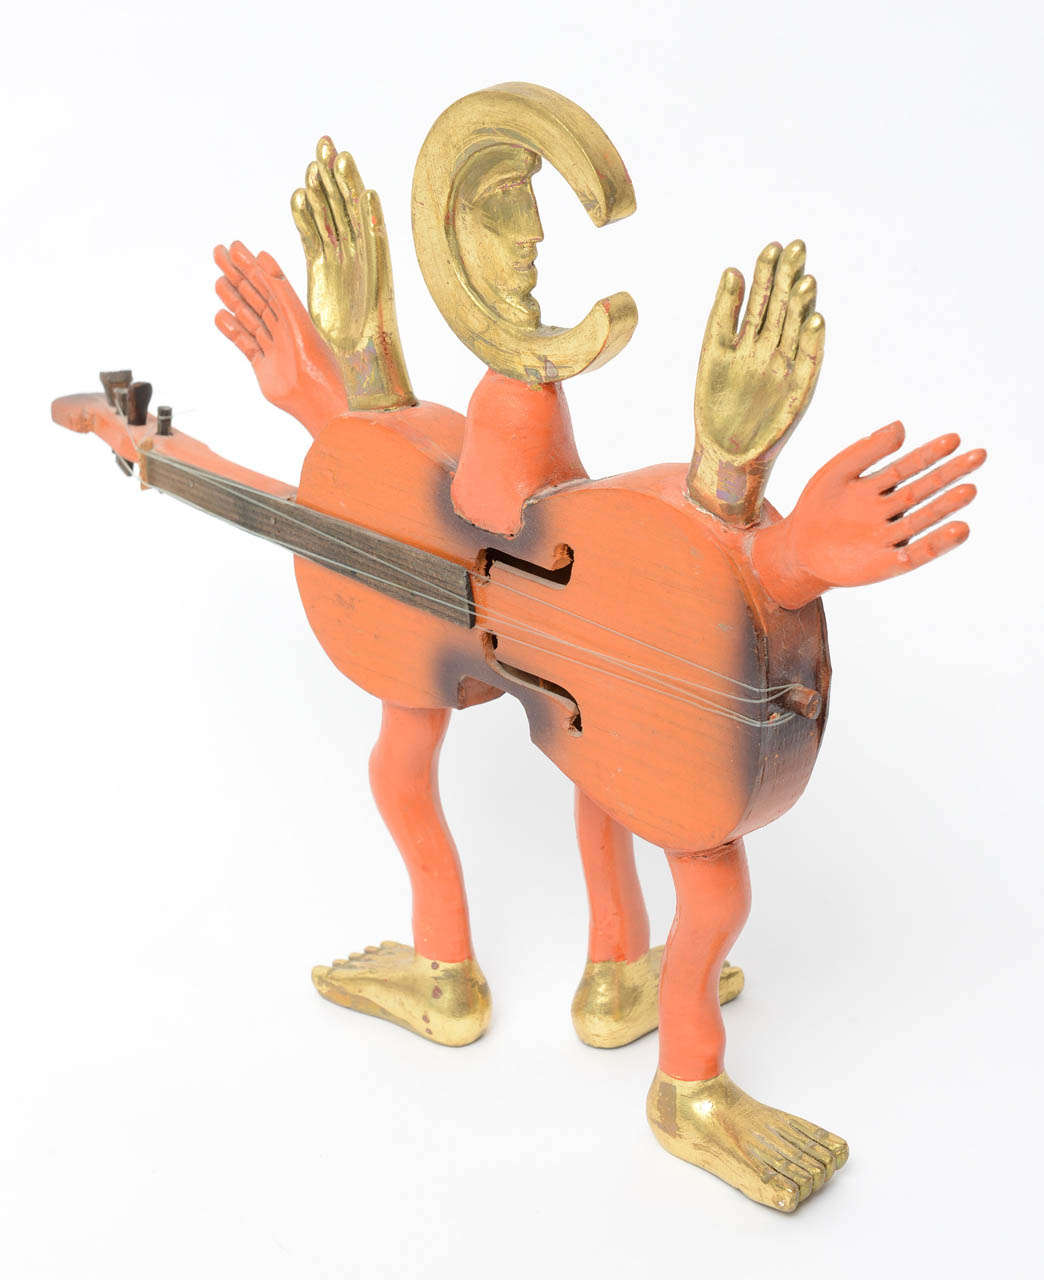 A whimsical sculpture from Pedro Friedeberg